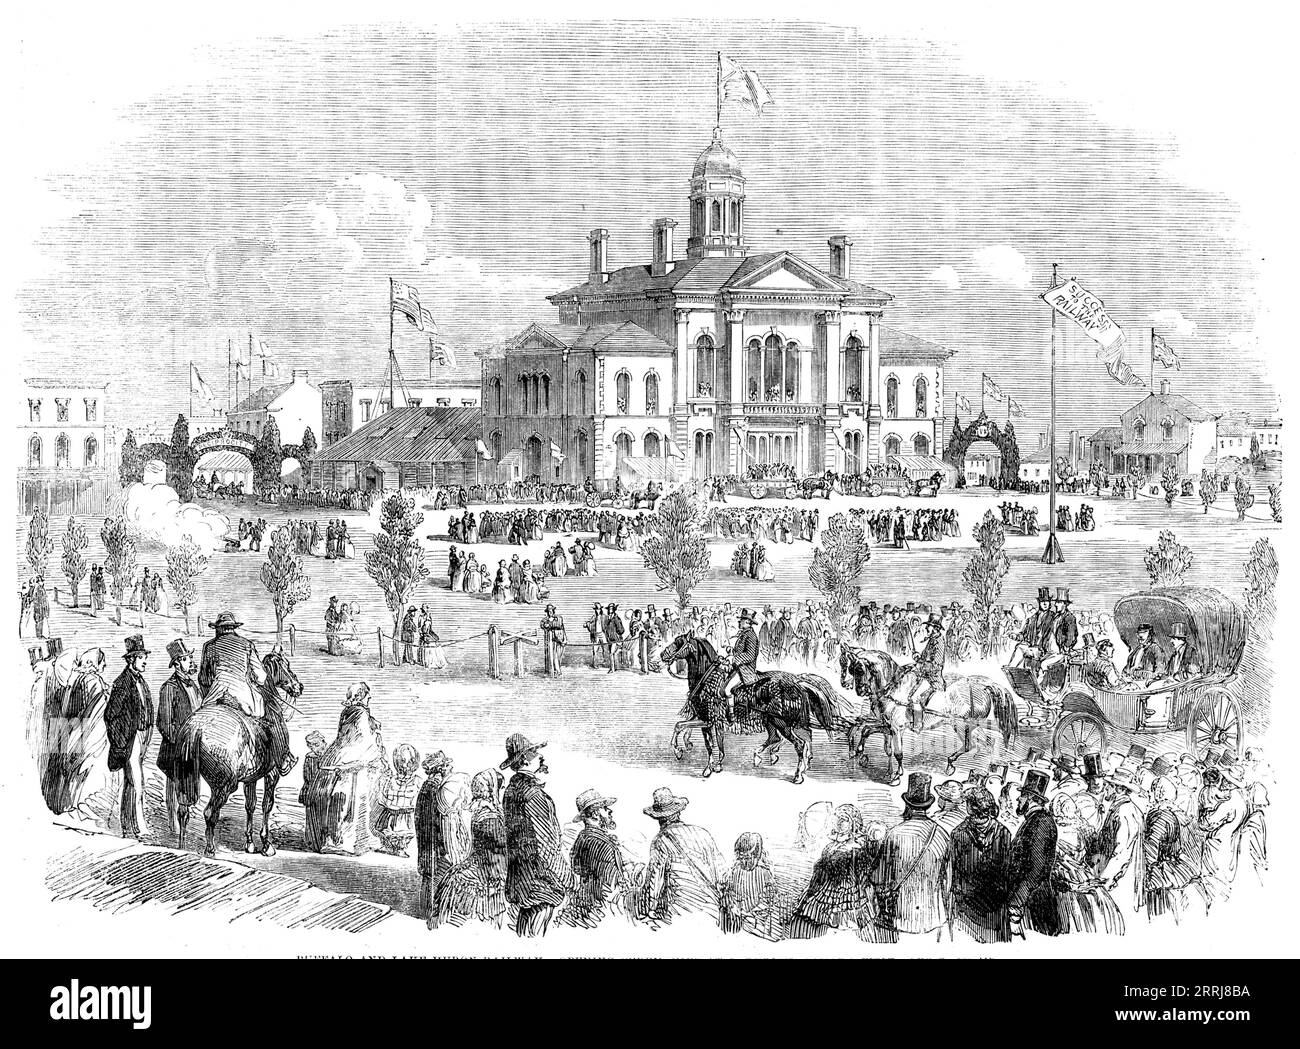 Buffalo and Lake Huron Railway: Opening Ceremonies at Goderich, Canada West, 1858. 'This railway, which is largely held by English capitalists, connects that inland sea, Lake Huron, through Buffalo, in the United States, with New York, Boston, and Portland harbours, and, through the Grand Trunk and Great Western of Canada, with Halifax and Quebec; thus connecting the western garden of the province by direct railway communication with the whole Atlantic seaboard of the North American continent, and thereby with, the harbours and markets of the world...Goderich, the subject of the present Sketch Stock Photo